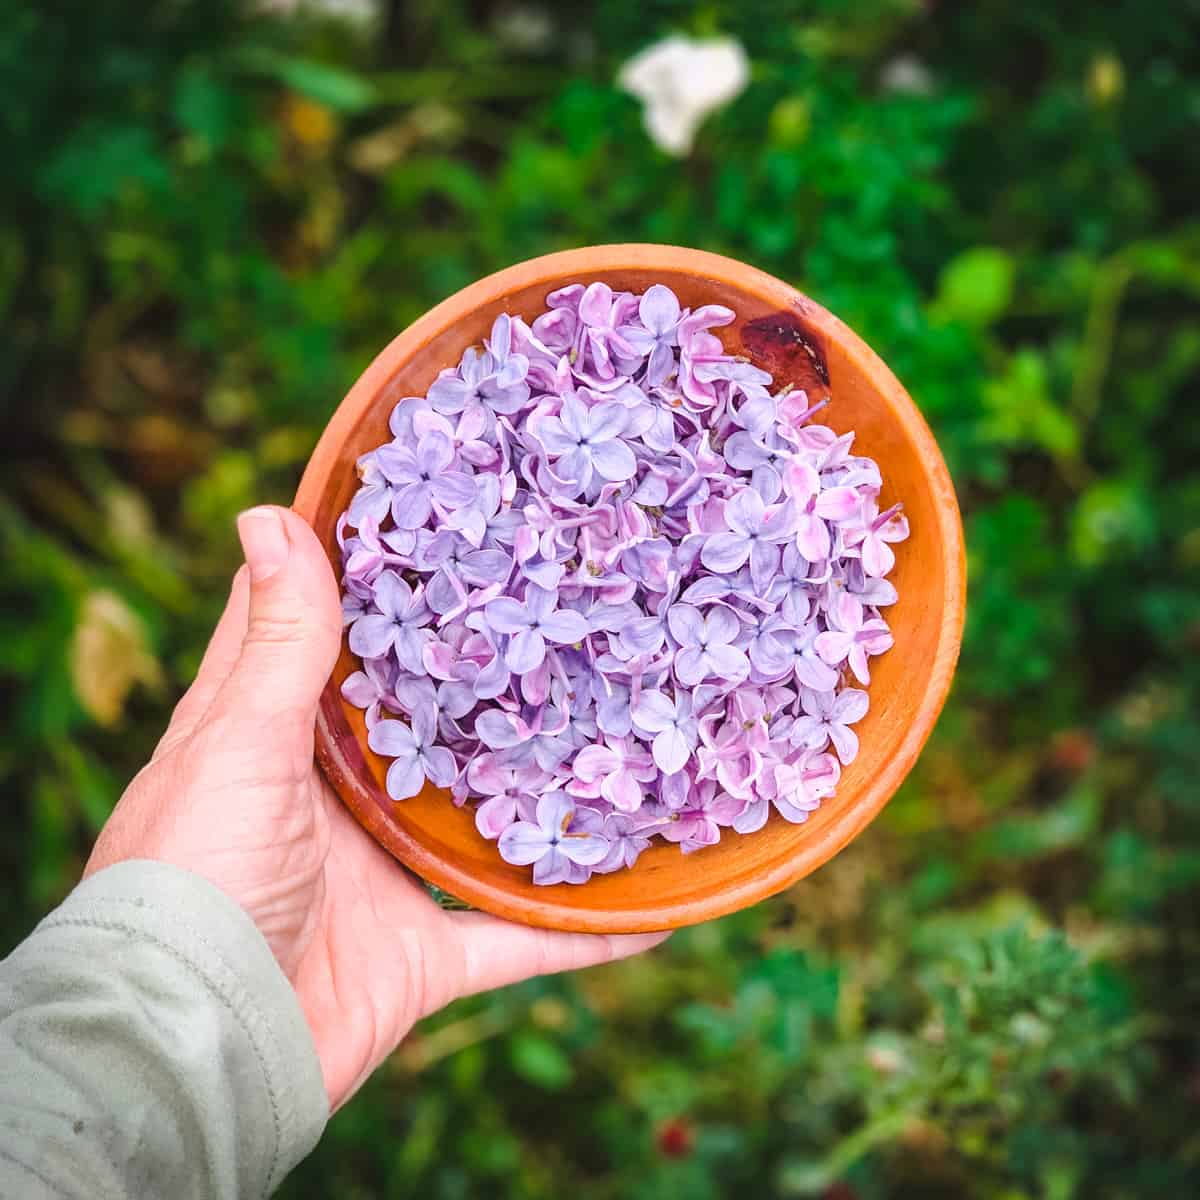 Lilac flowers in a wood bowl outside held by a hand, top view. 